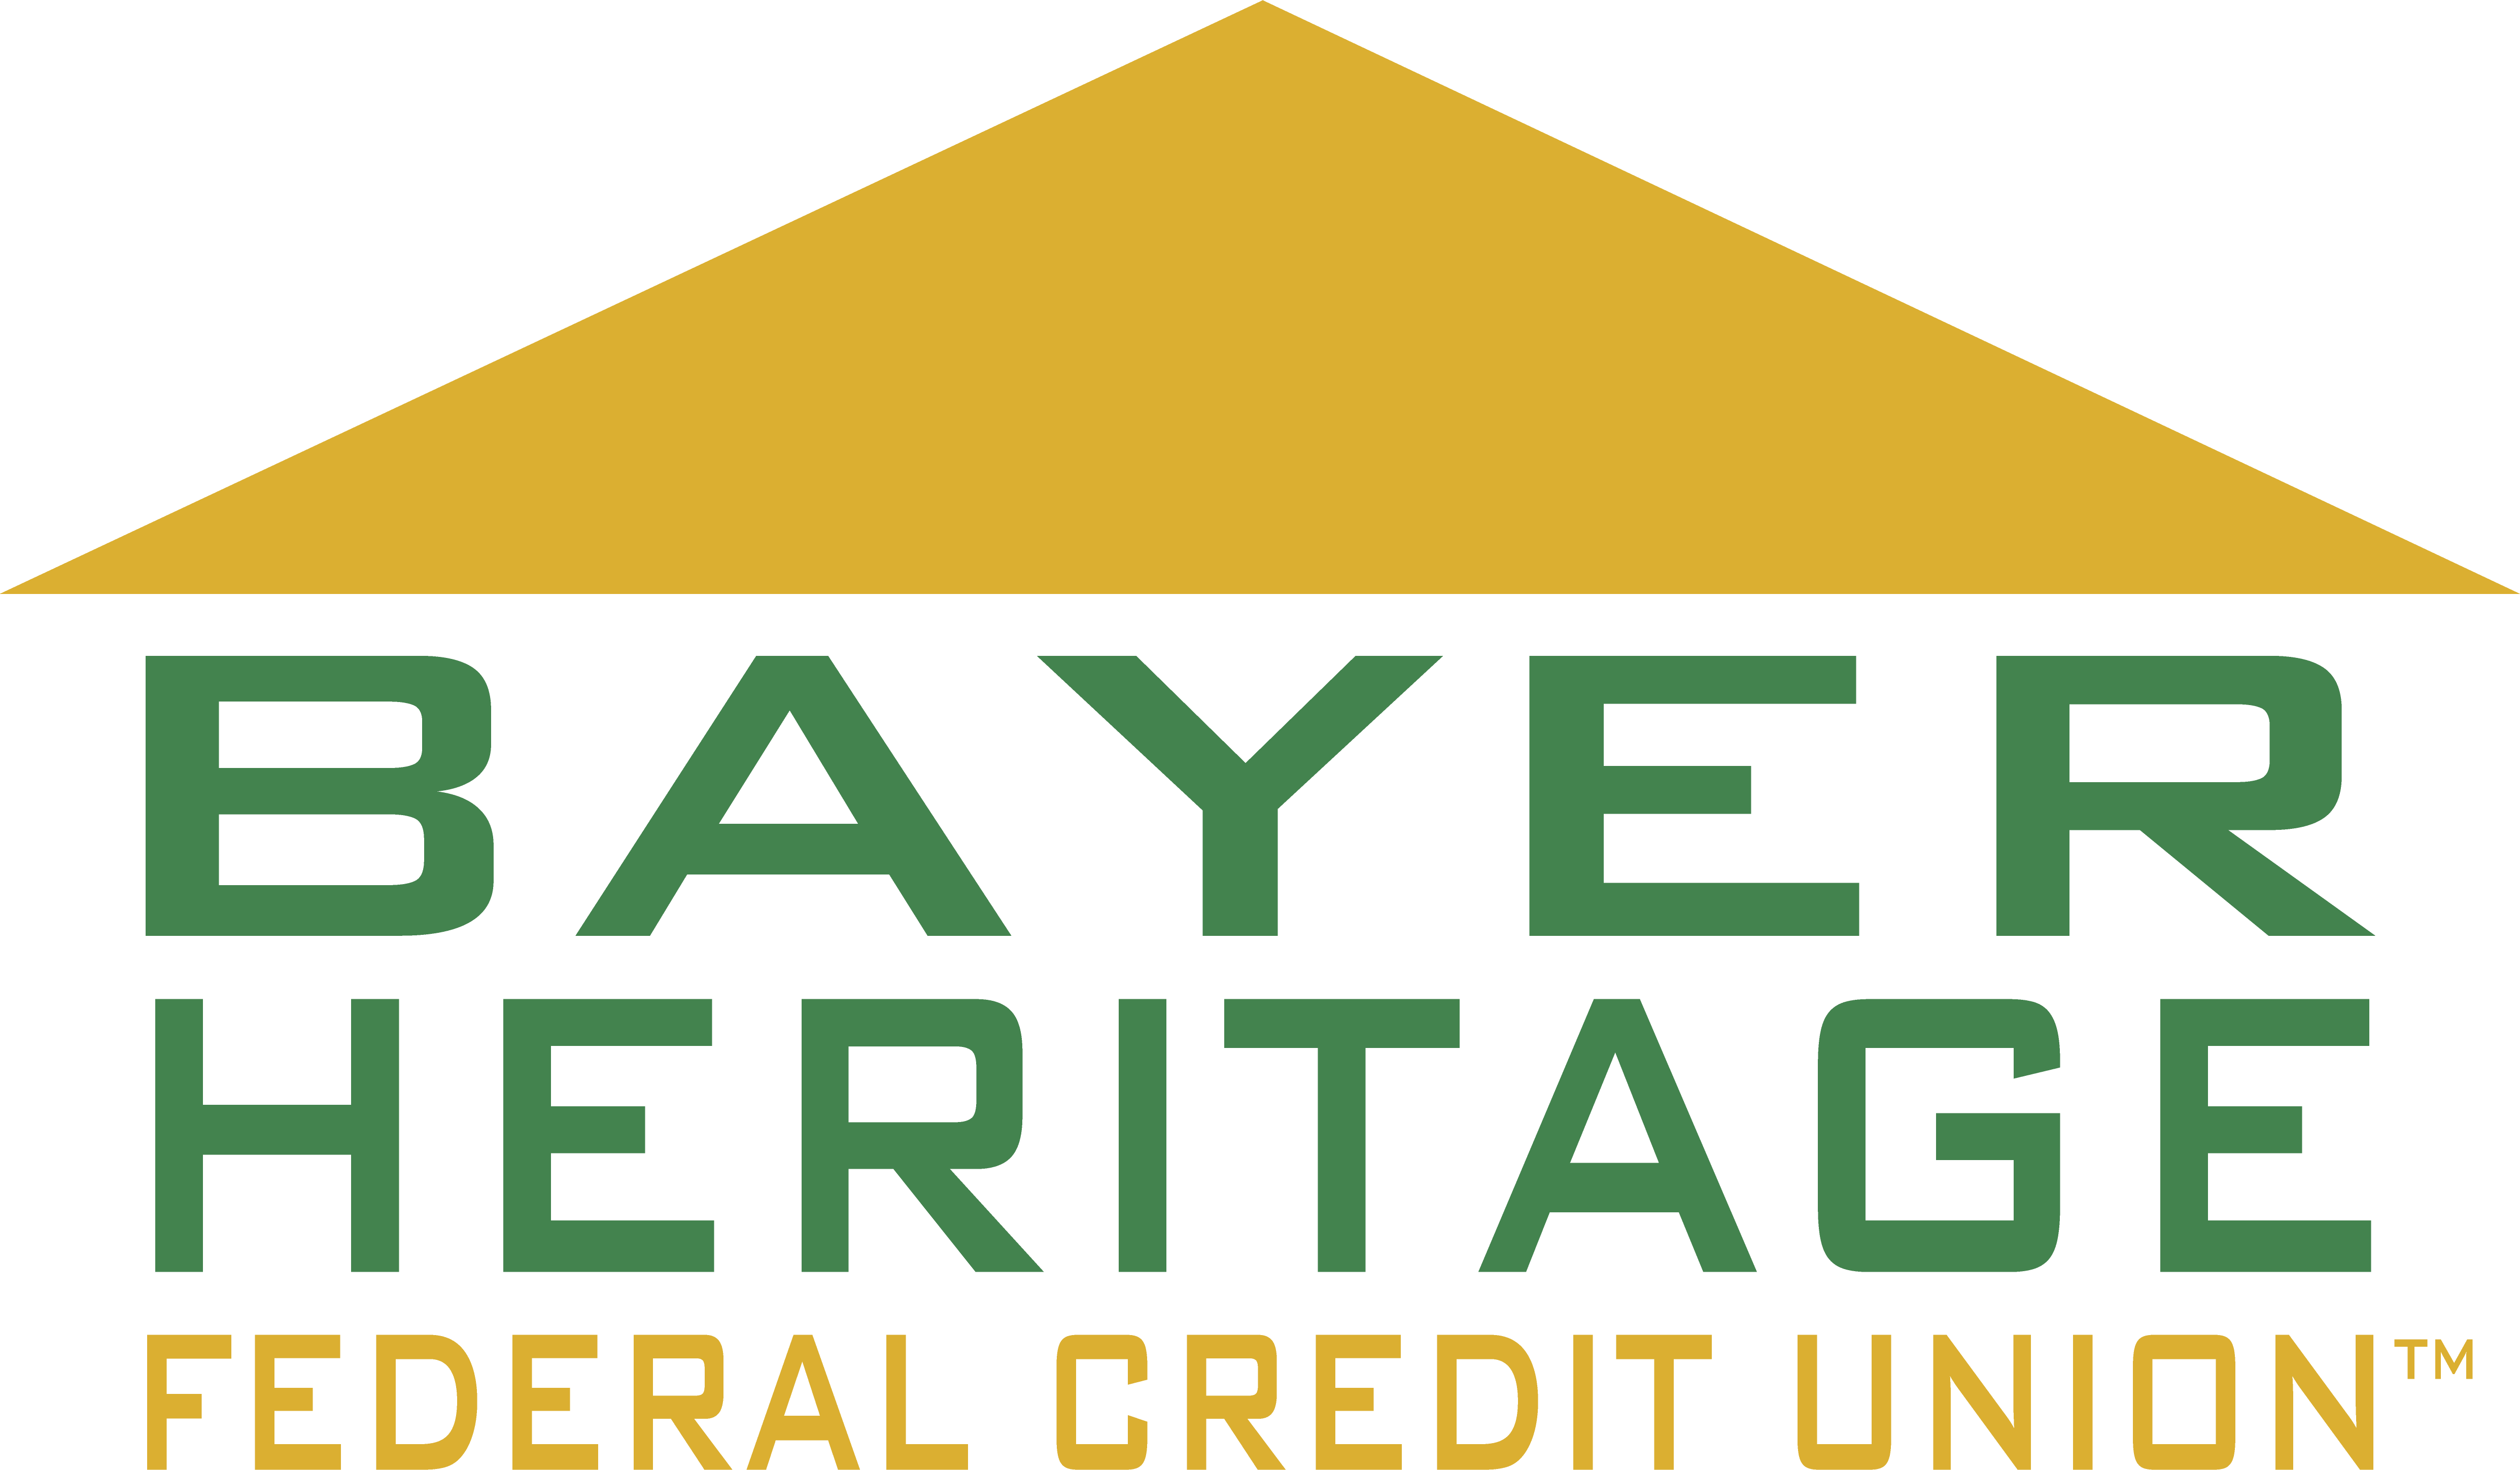 Bayer Heritage Federal Credit Union full color logo